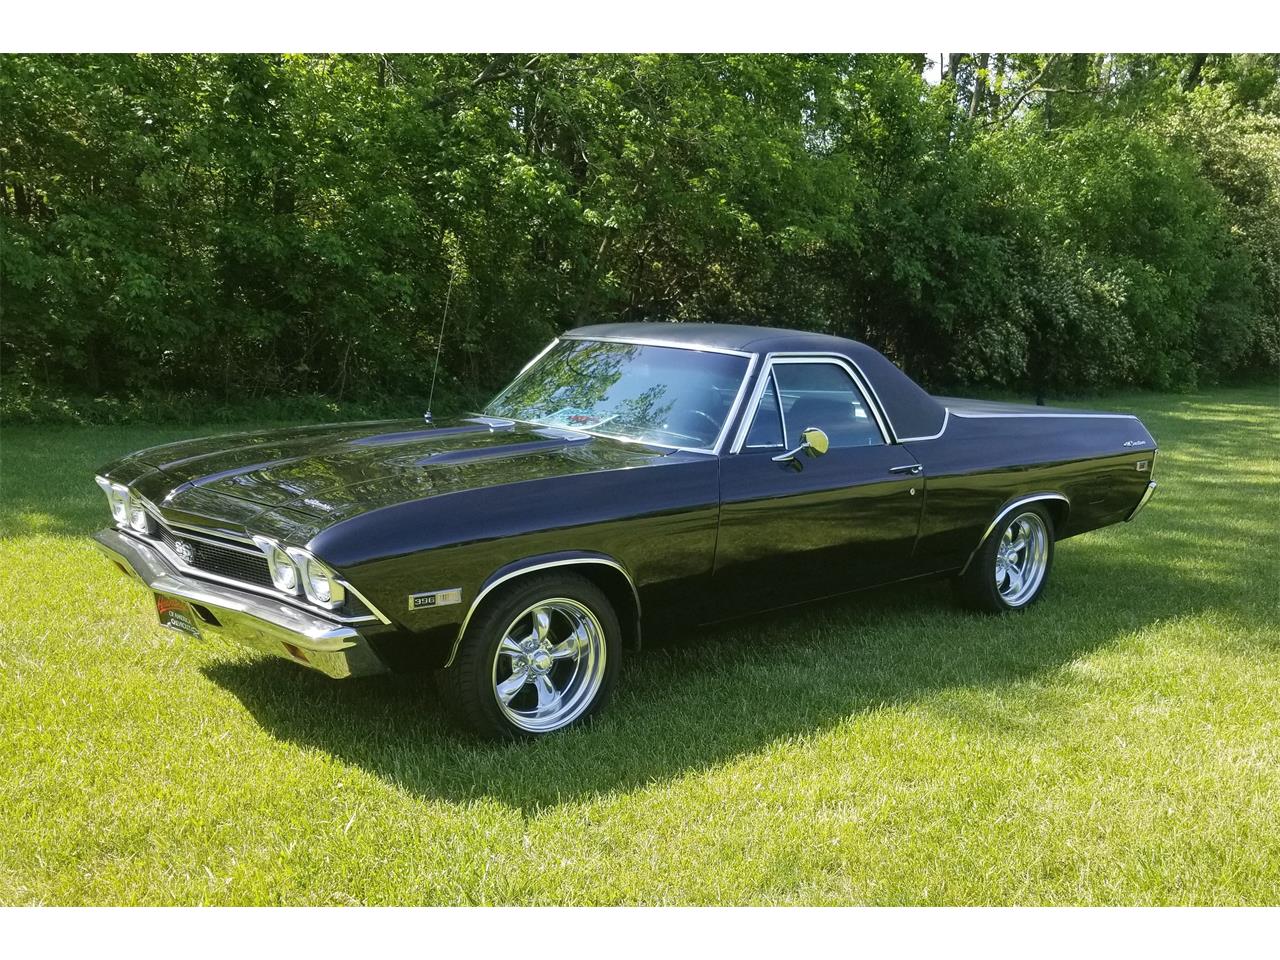 Black 1968 Chevrolet El Camino SS for sale located in West Chester, Ohio - ...